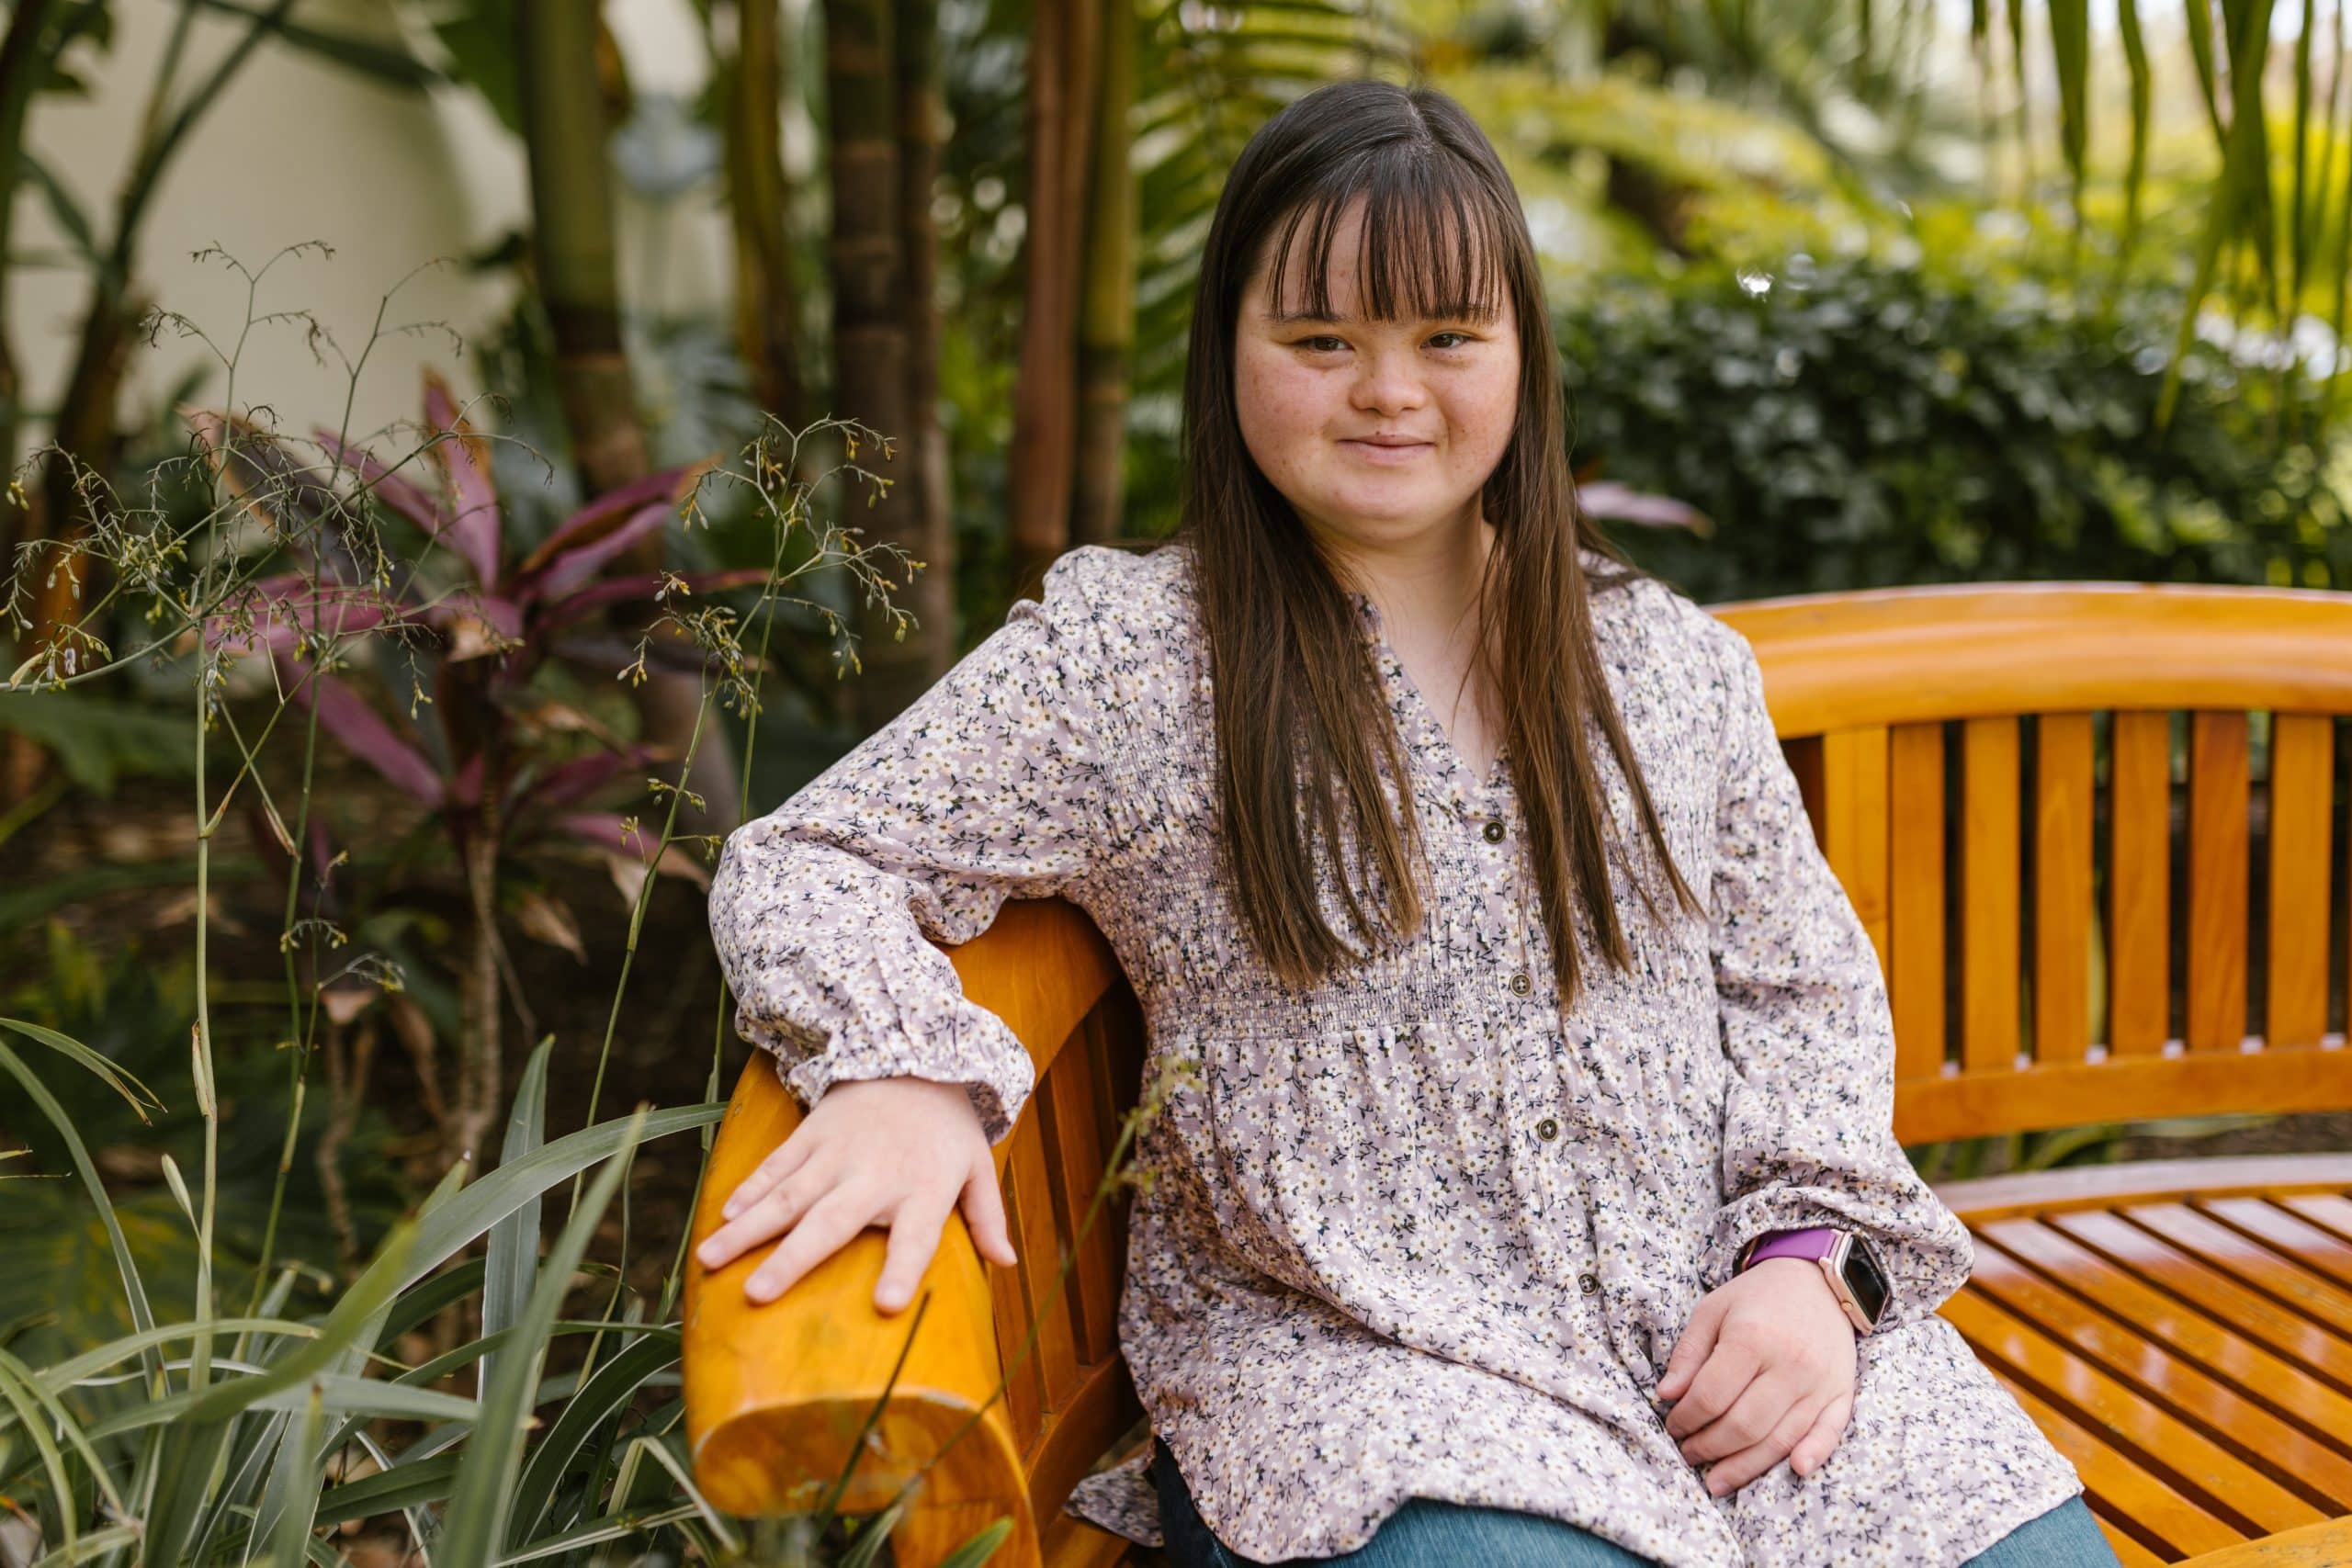 A lady sat on bench in a park, she is happy she started Down's Syndrome Counselling